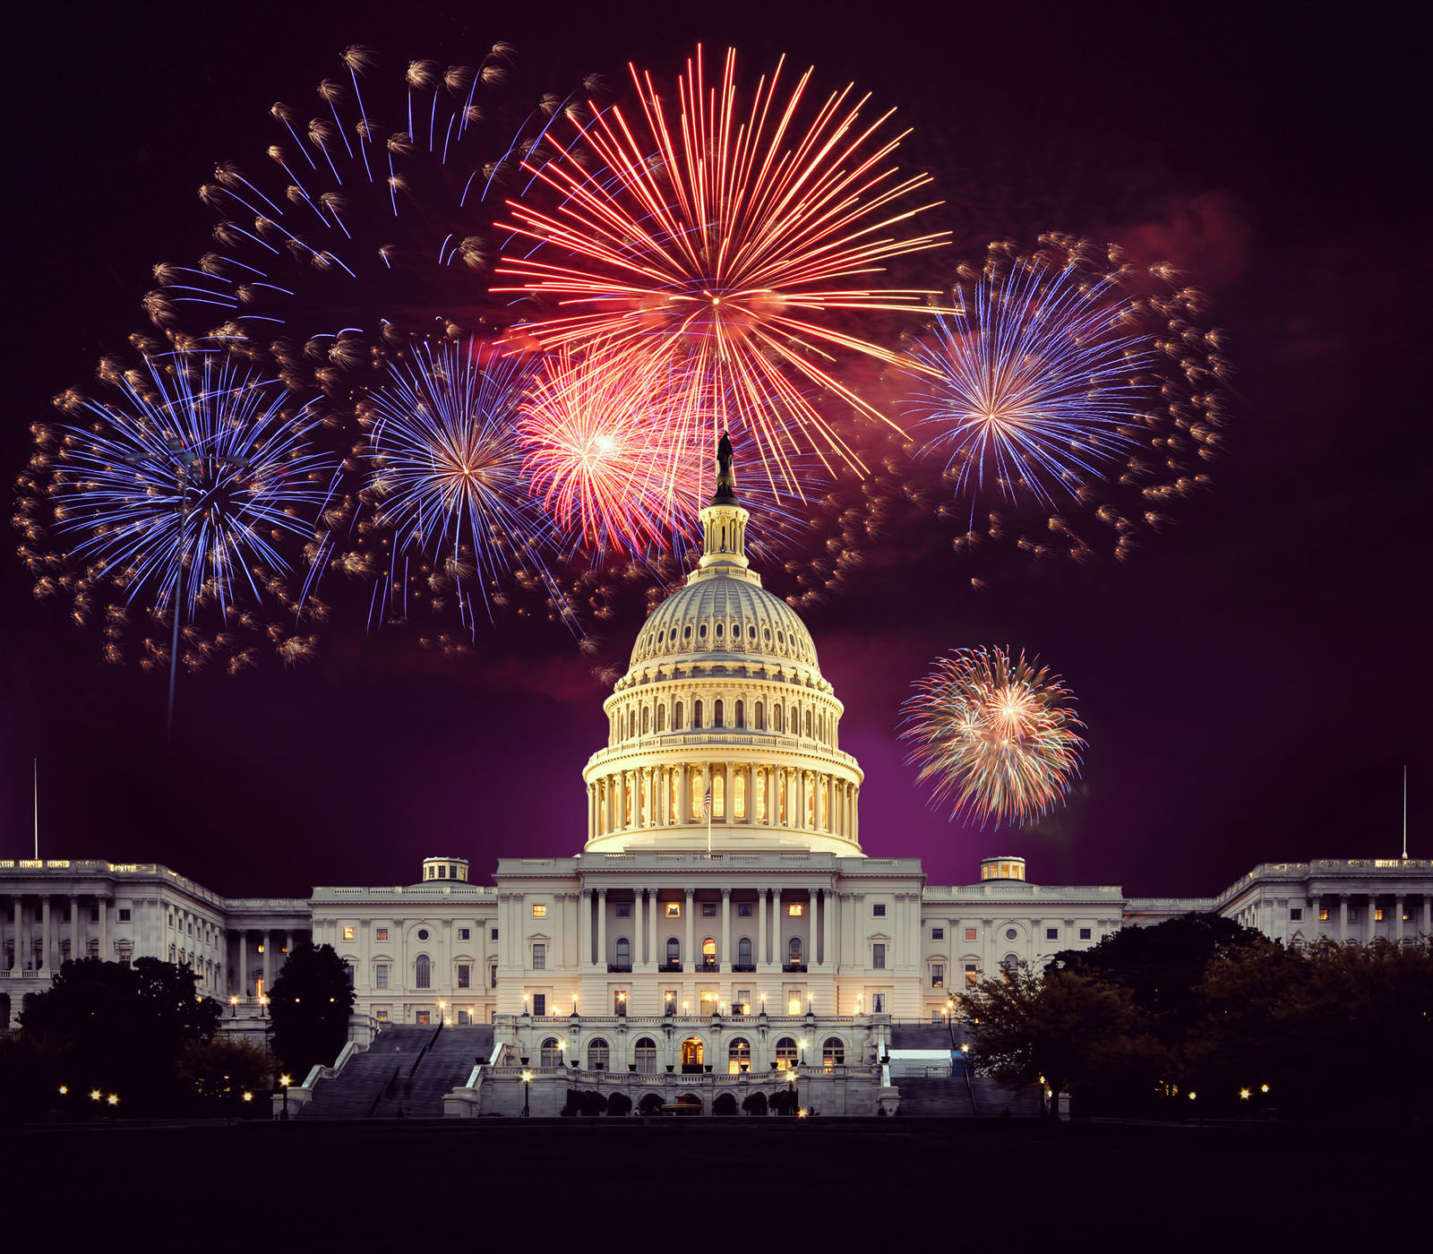 Getting around D.C. may be a challenge on July 4. (PRNewsFoto/Capital Concerts)